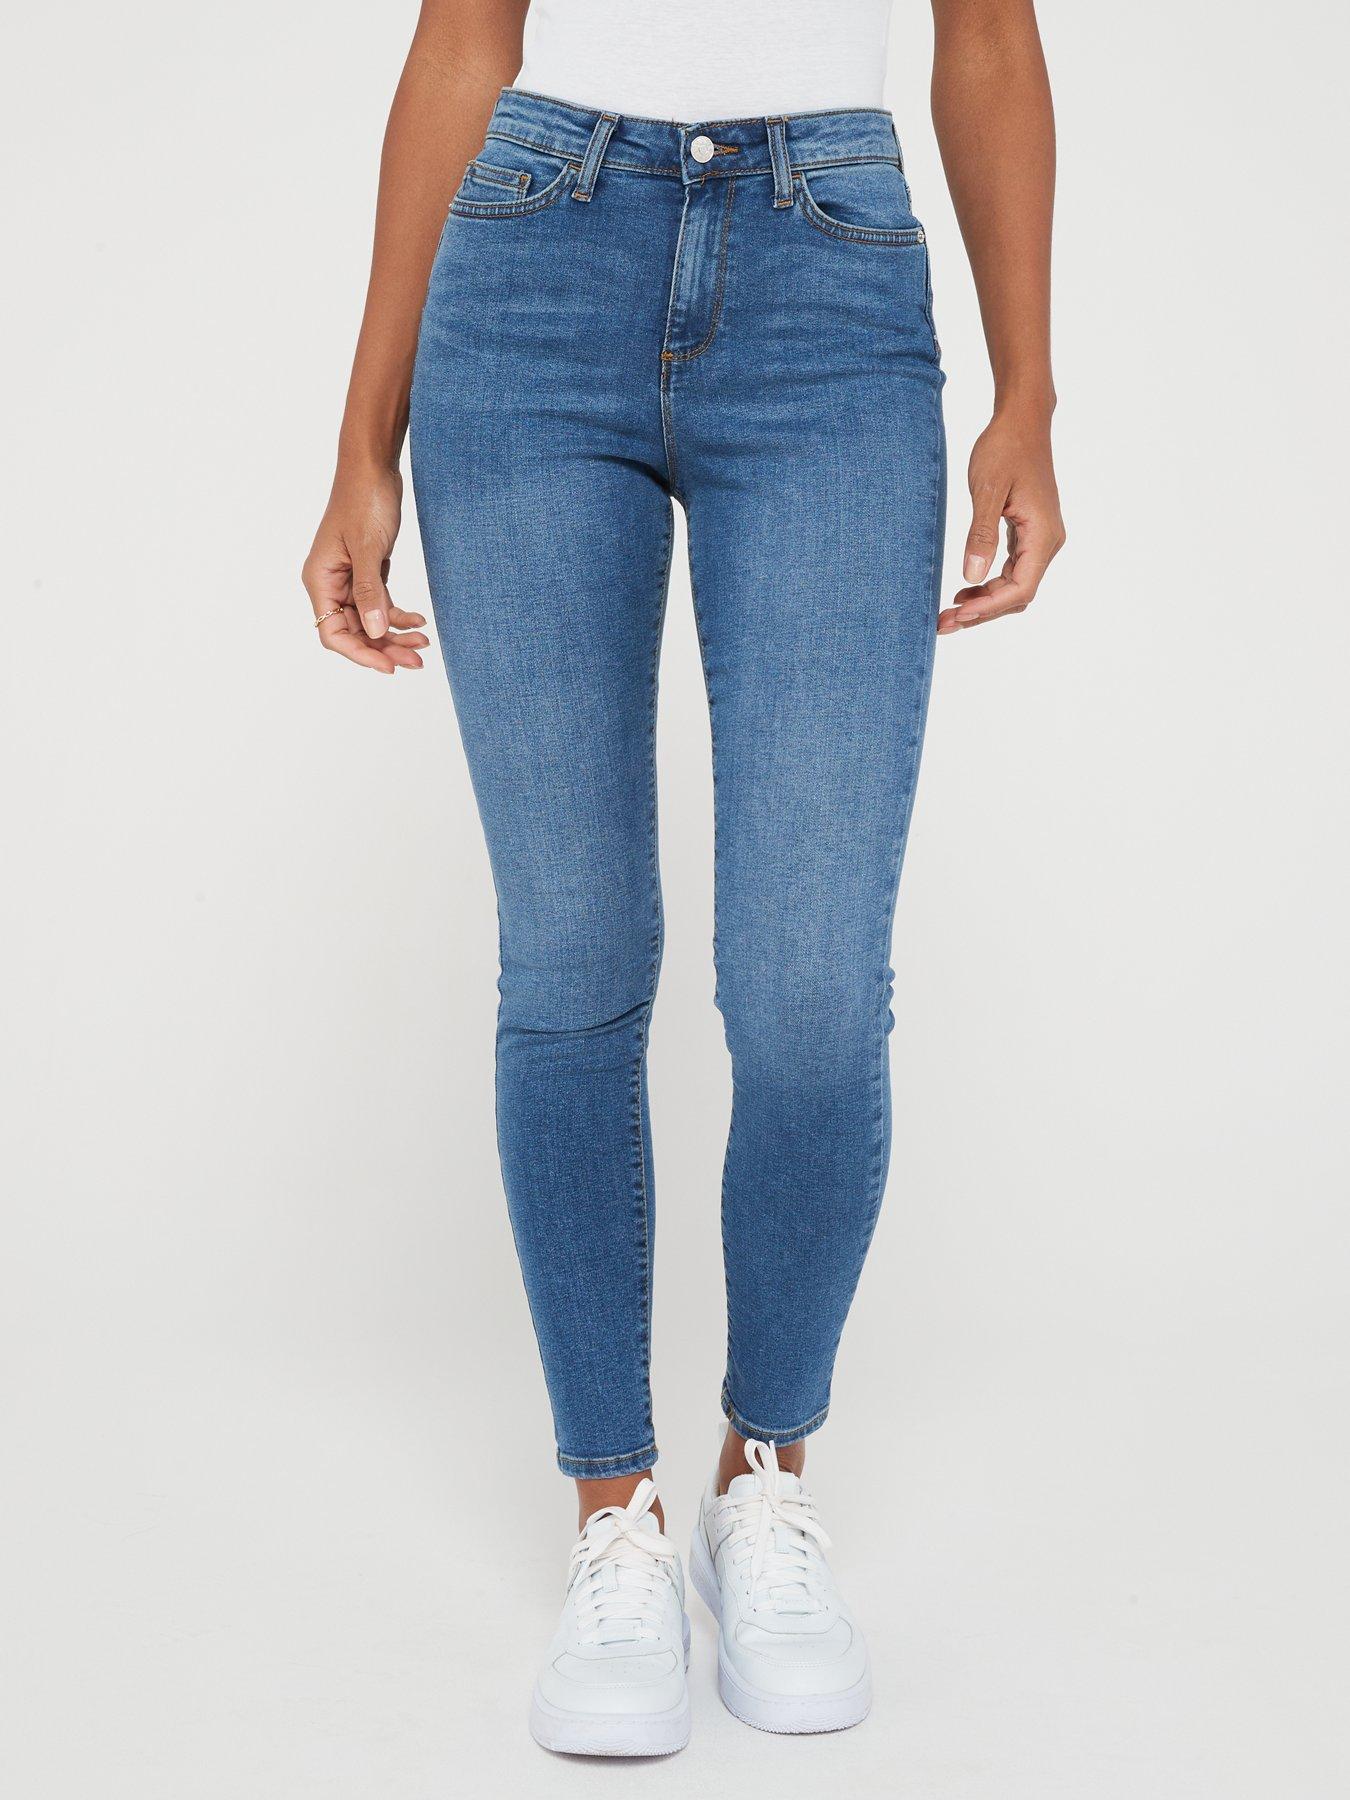 R Jeans Mid Rise Skinny Jeans - Size 24